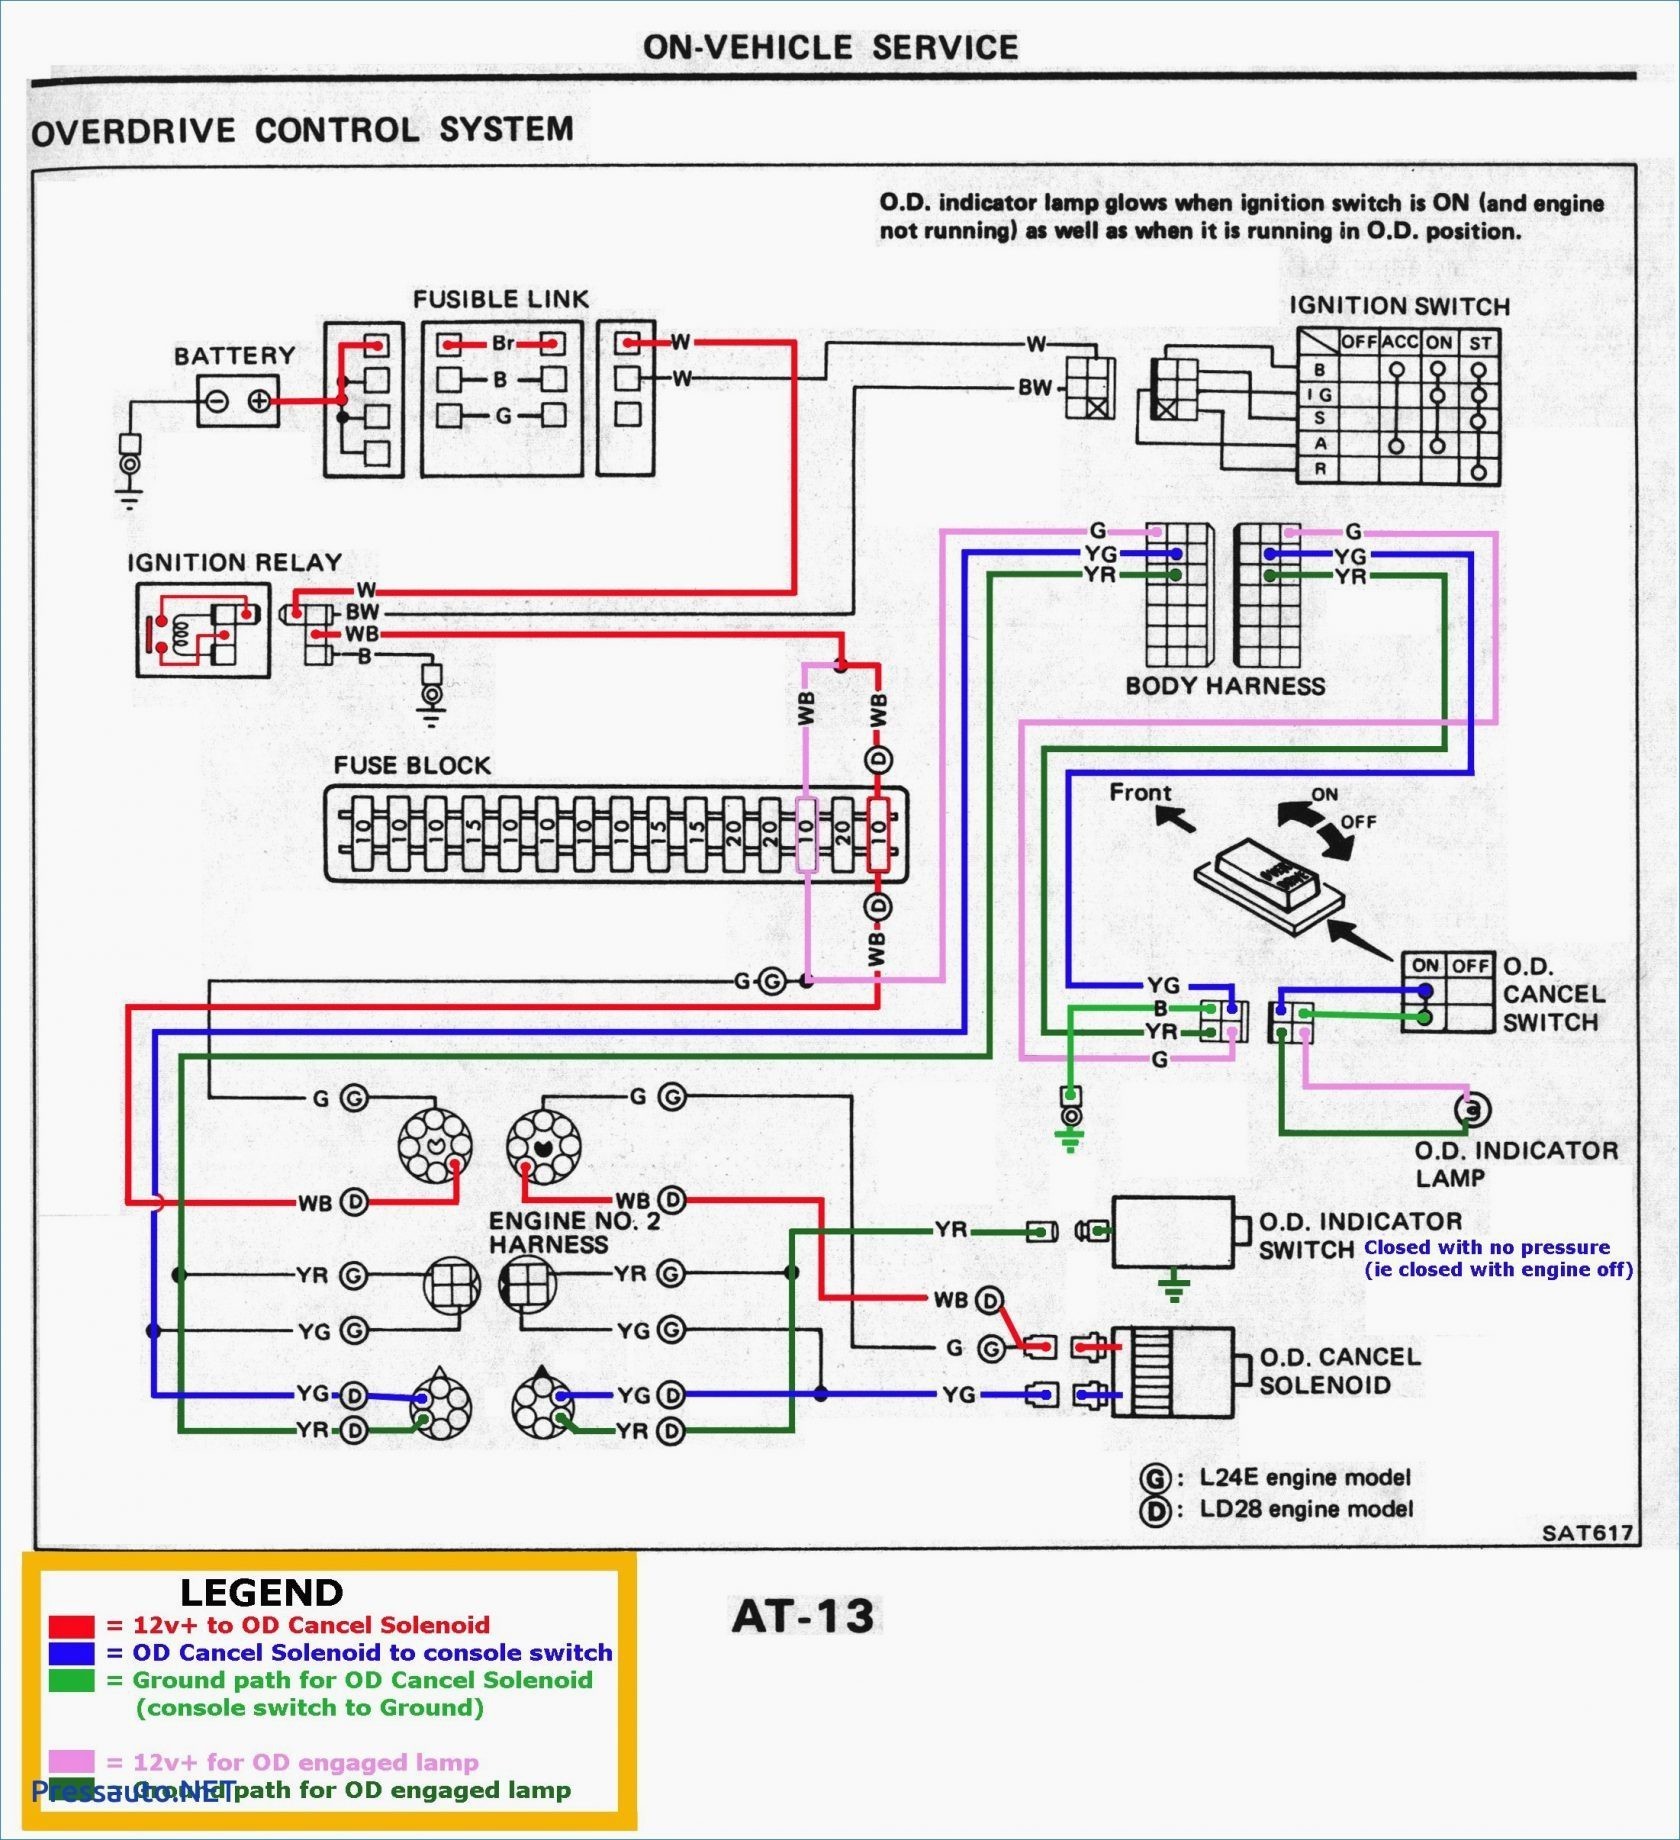 1998 Plymouth Neon Engine Diagram 1996 Plymouth Neon Stereo Wiring Of 1998 Plymouth Neon Engine Diagram